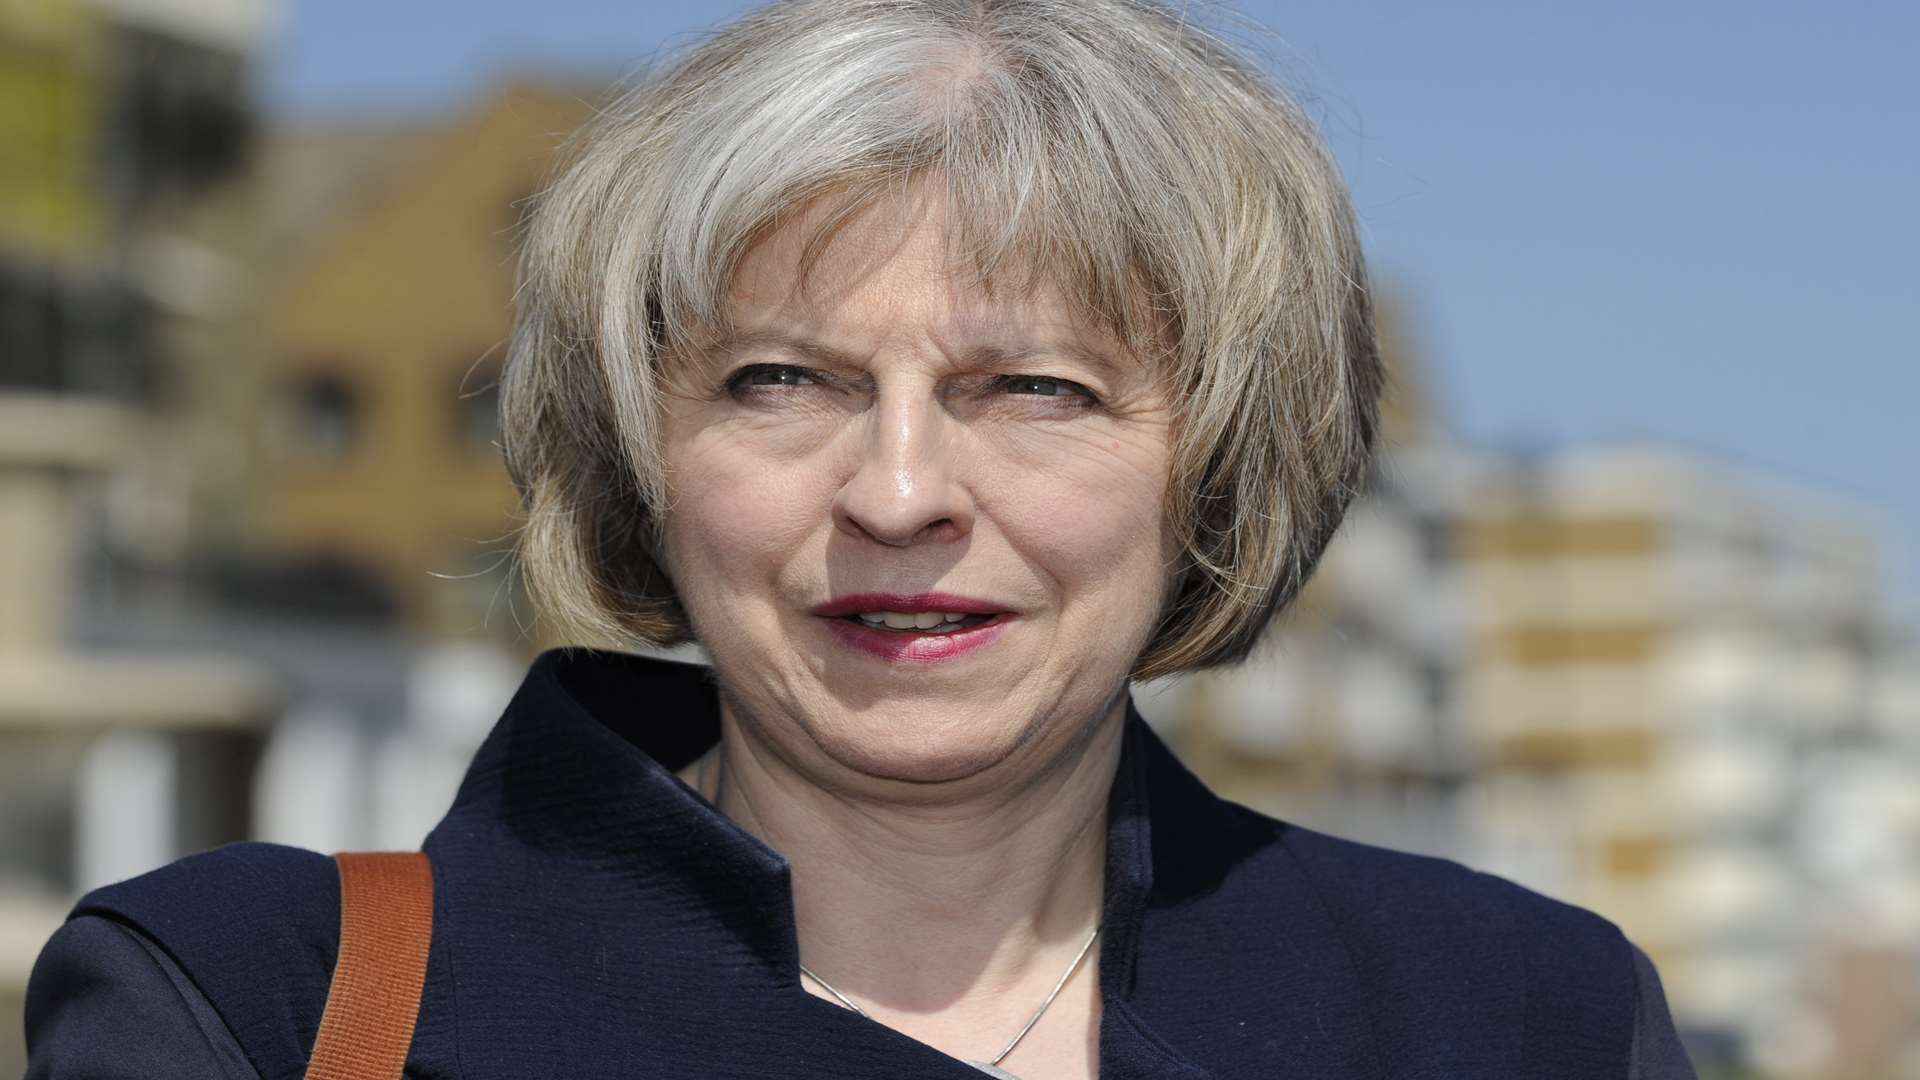 Theresa May is in favour of more grammar schools